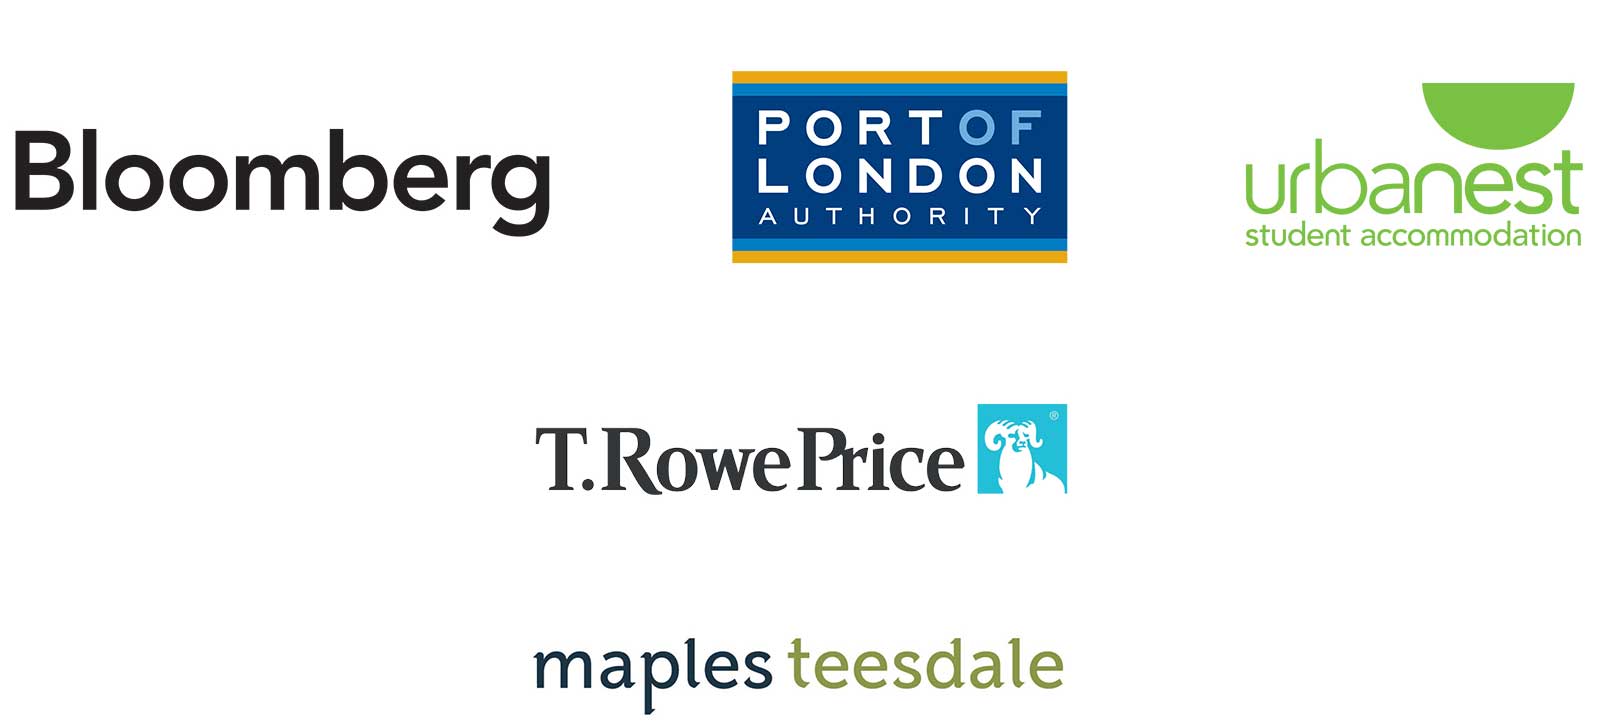 Corporate Members: Bloomber; Port of London Authority; Urbanest Student Accomodation; T. Rowe Price; Maples teesdale